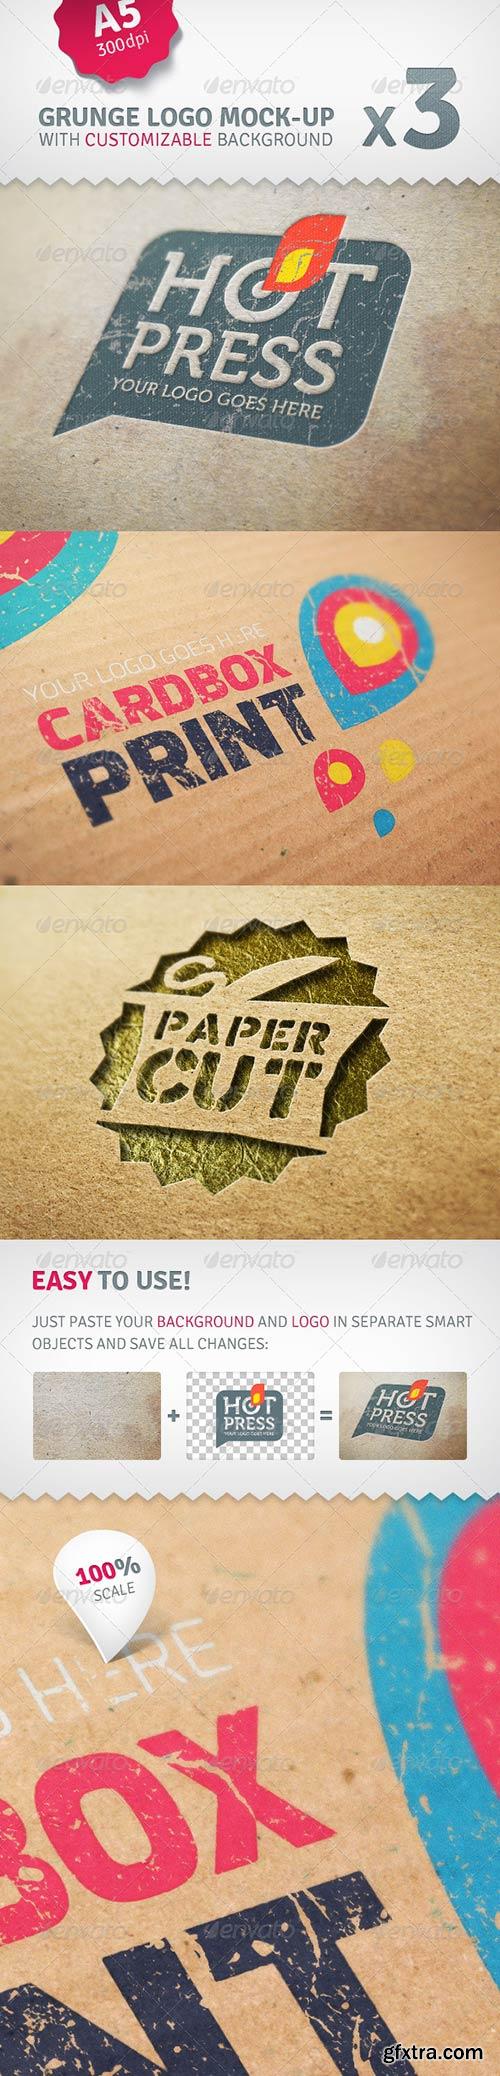 GraphicRiver - Cardboard Logo Mockup Pack With Custom Backgrounds